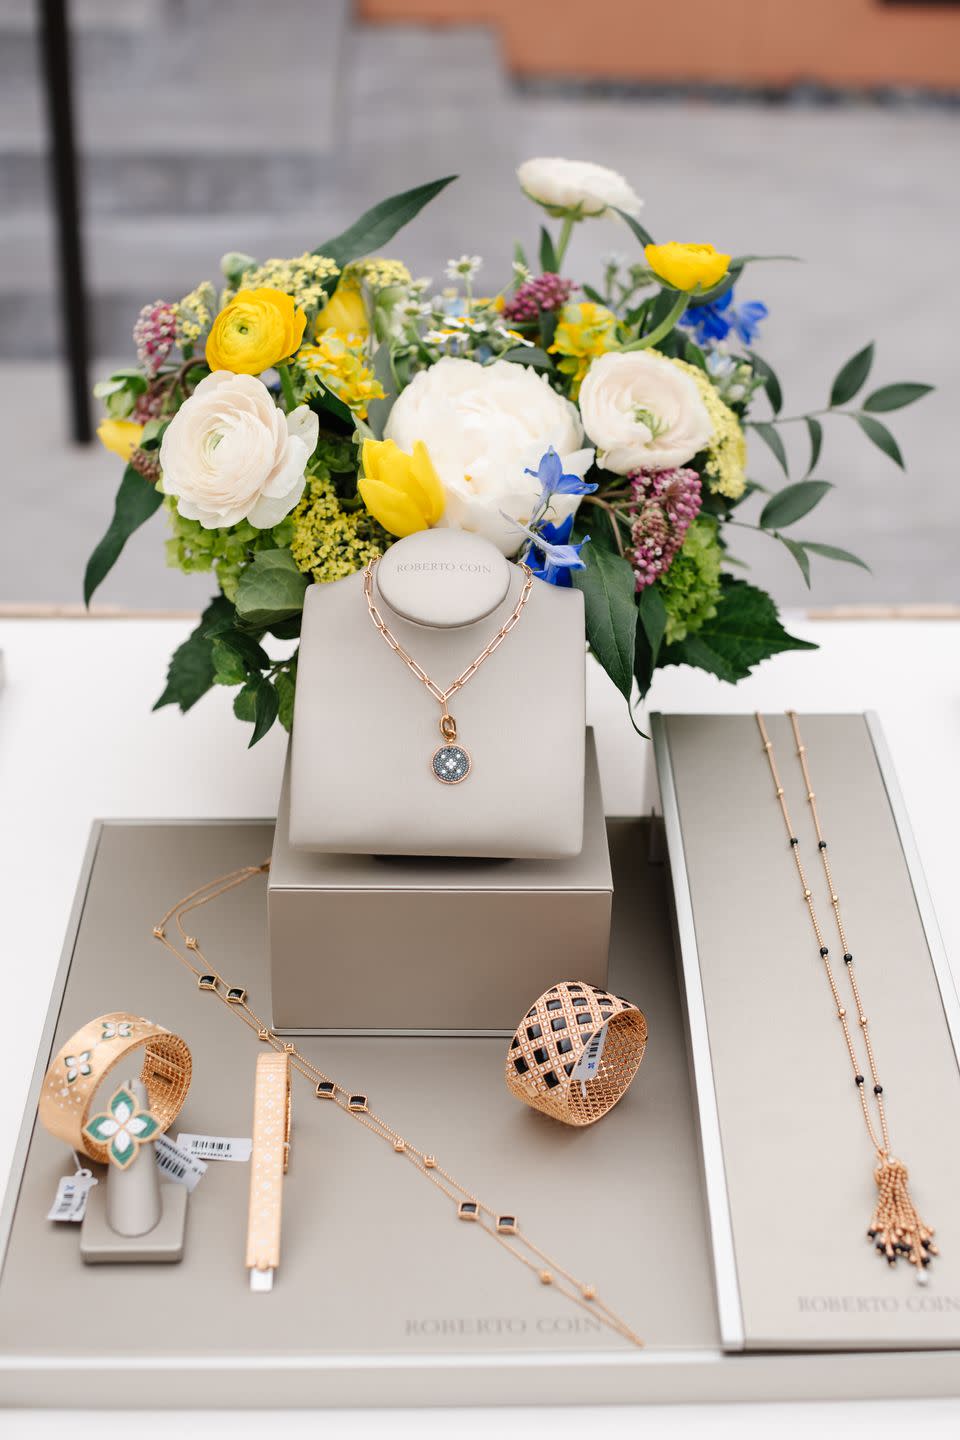 An Intimate Luncheon & Jewelry Presentation with Roberto Coin